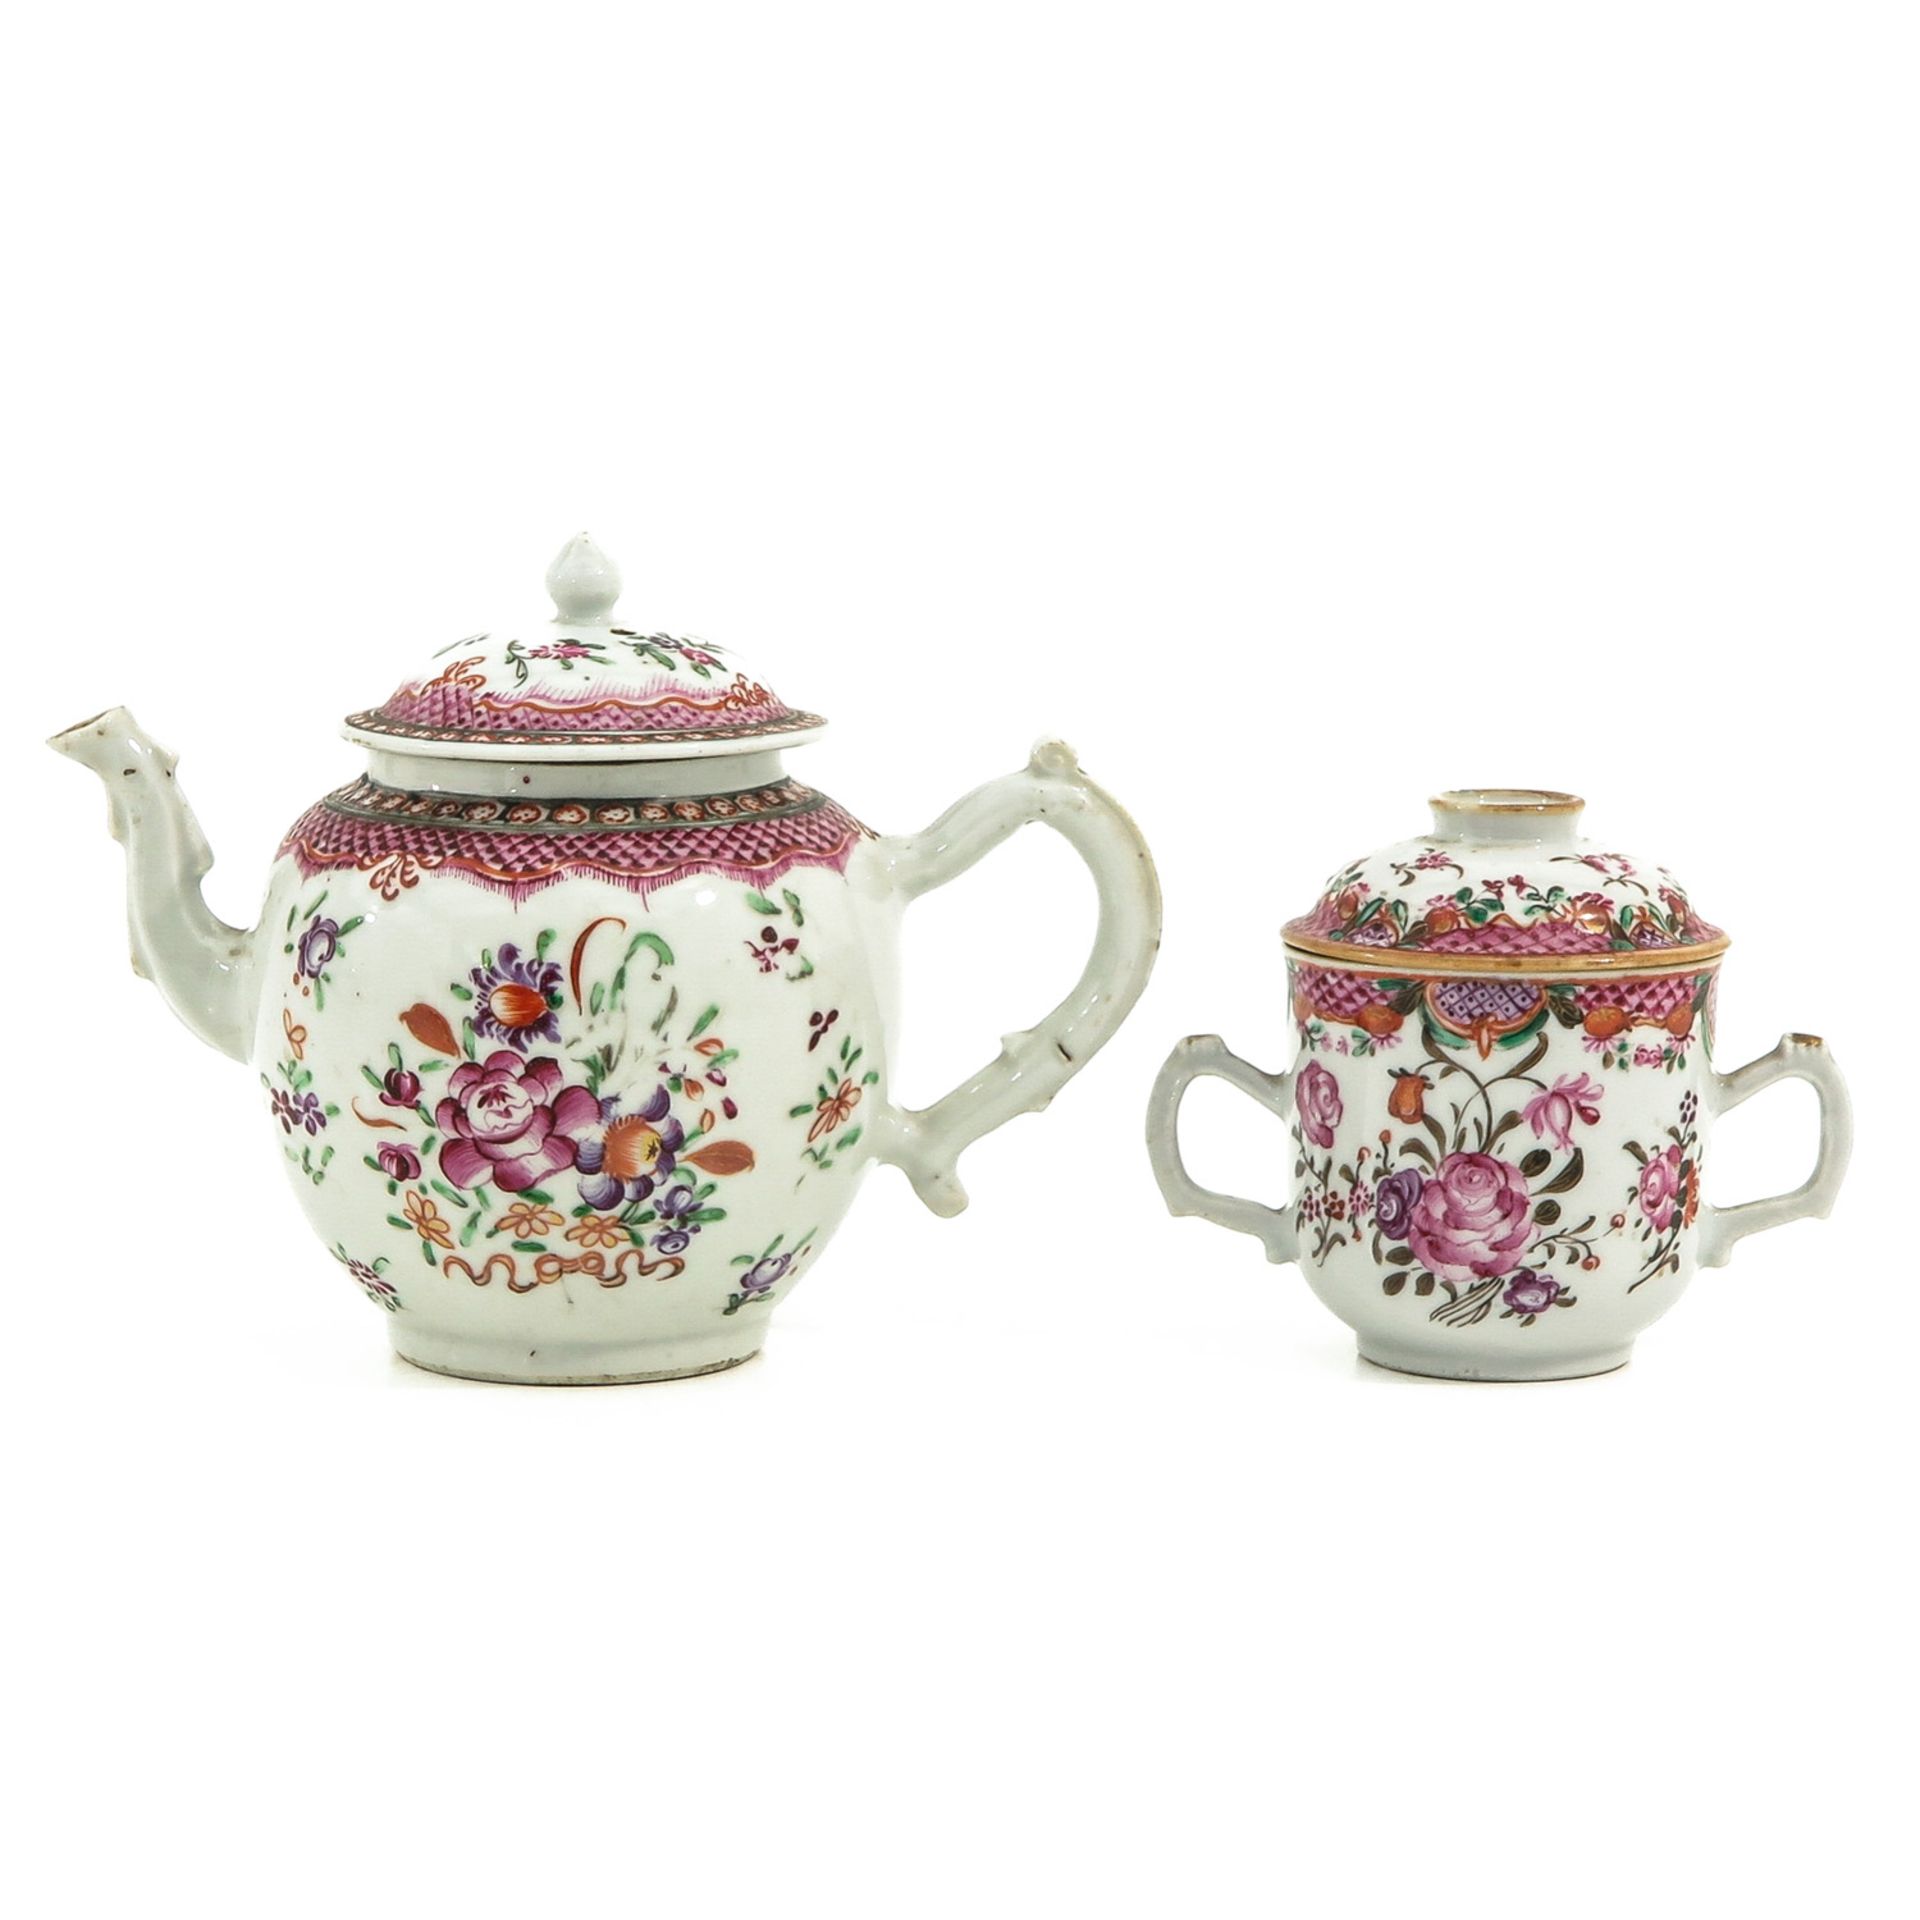 A Famille Rose Teapot and Covered Sugar Pot